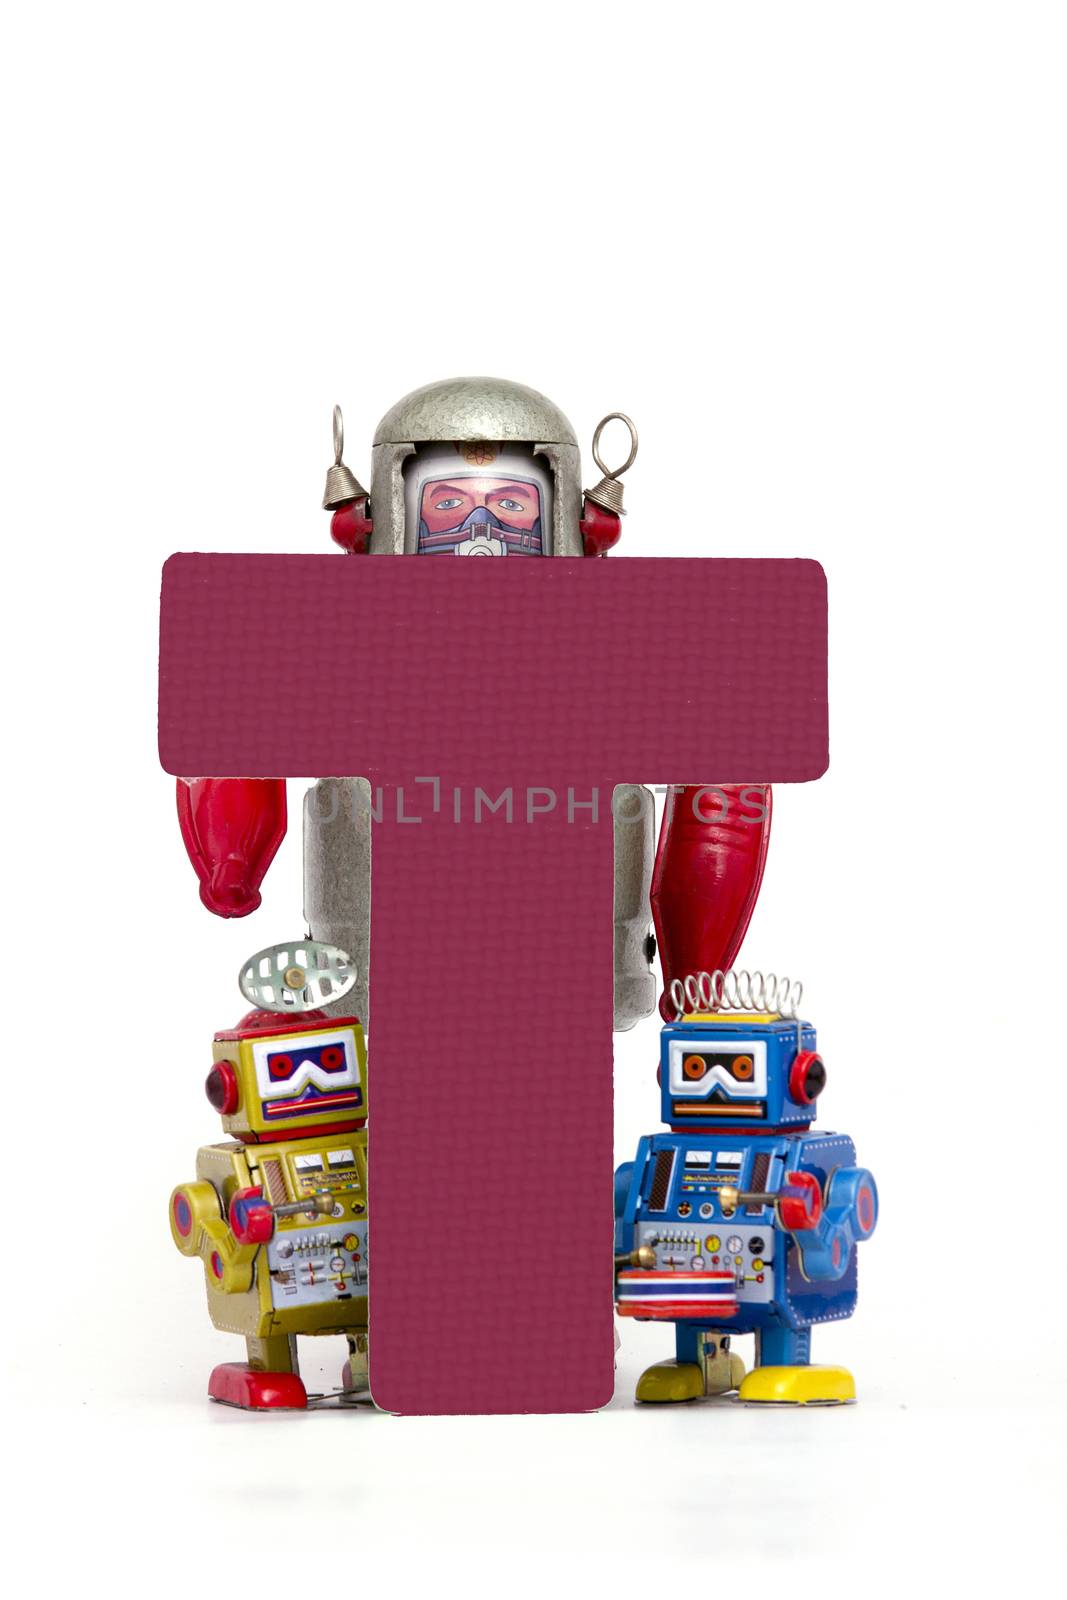 capital letter T held by vintage robot toys 